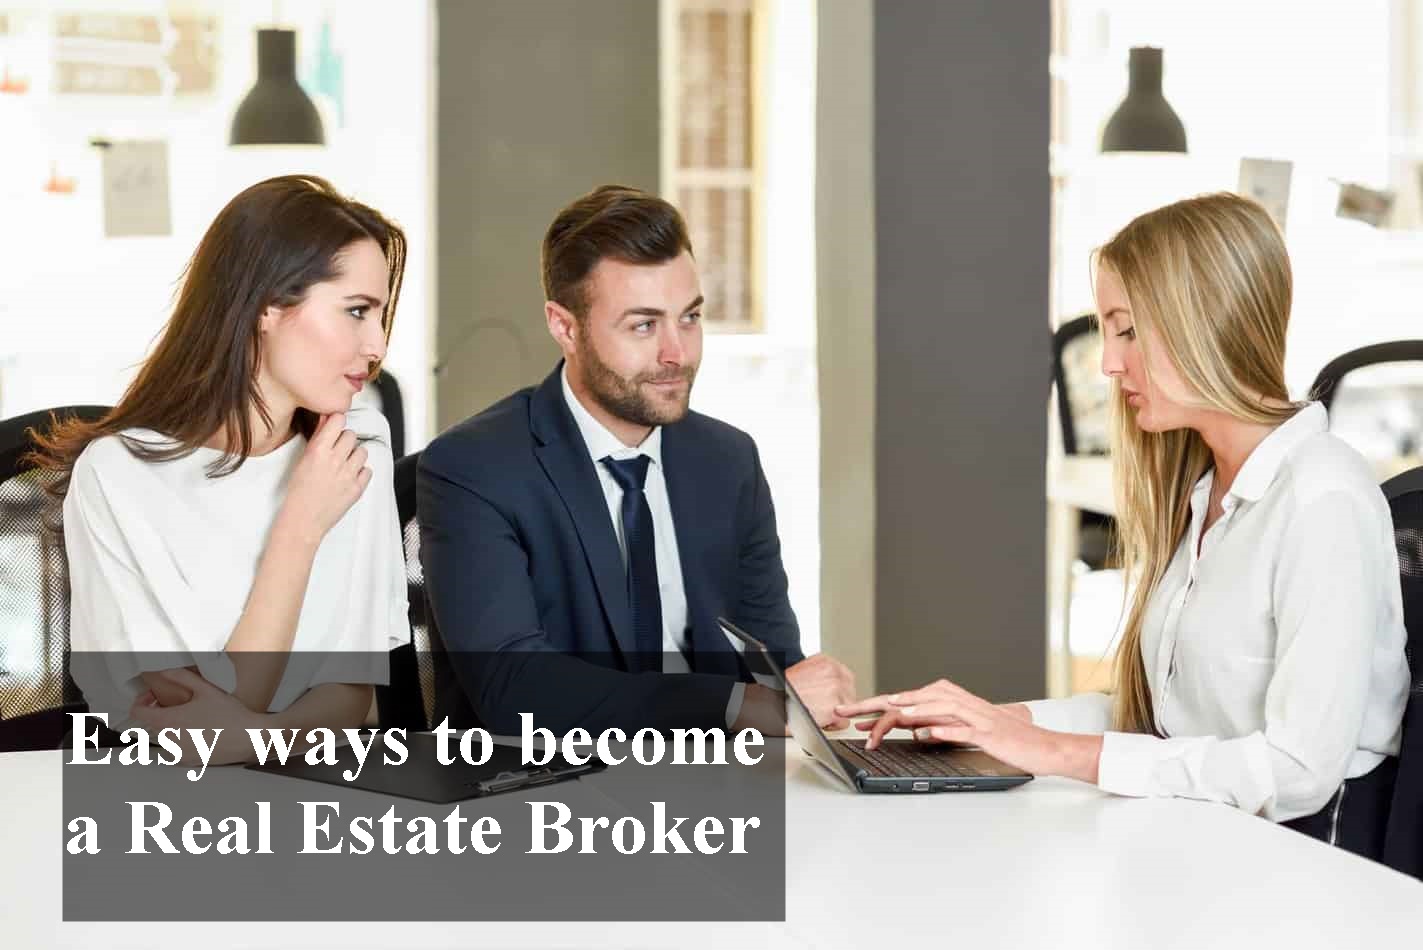 Easy ways to become a Real Estate Broker